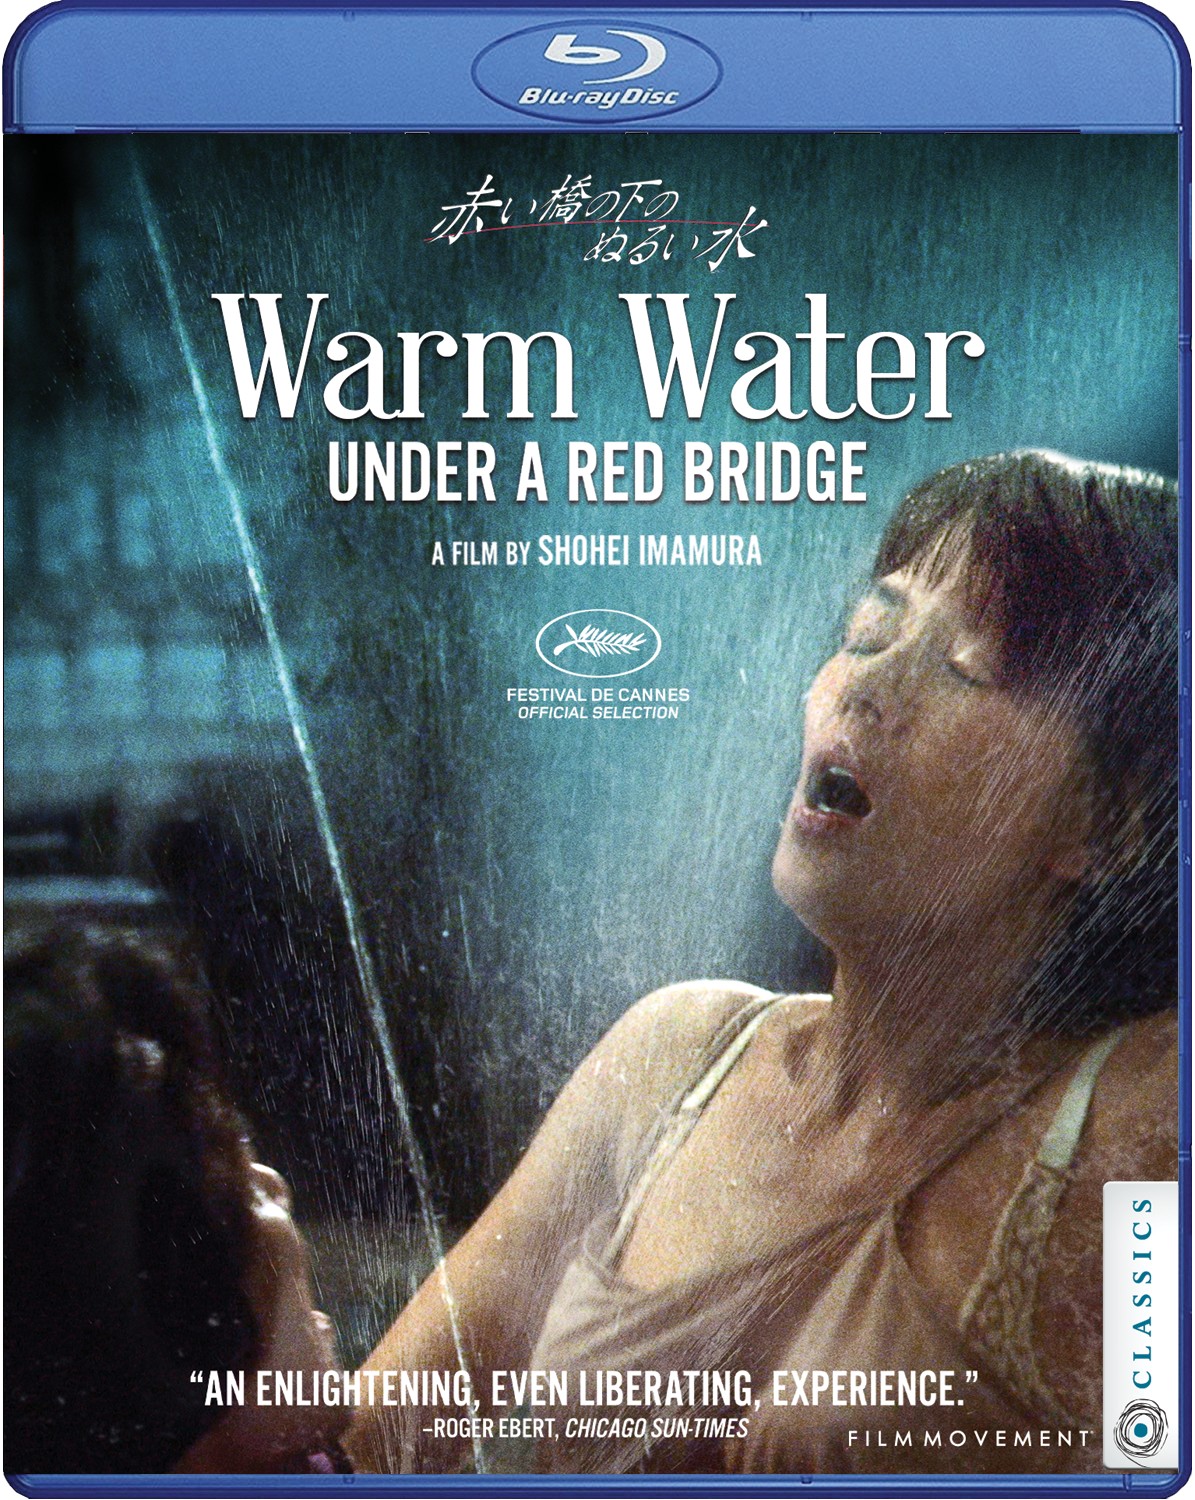 Experience the Magic of Shohei Imamura's 'Warm Water Under a Red Bridge' with Extras-Laden Release 1